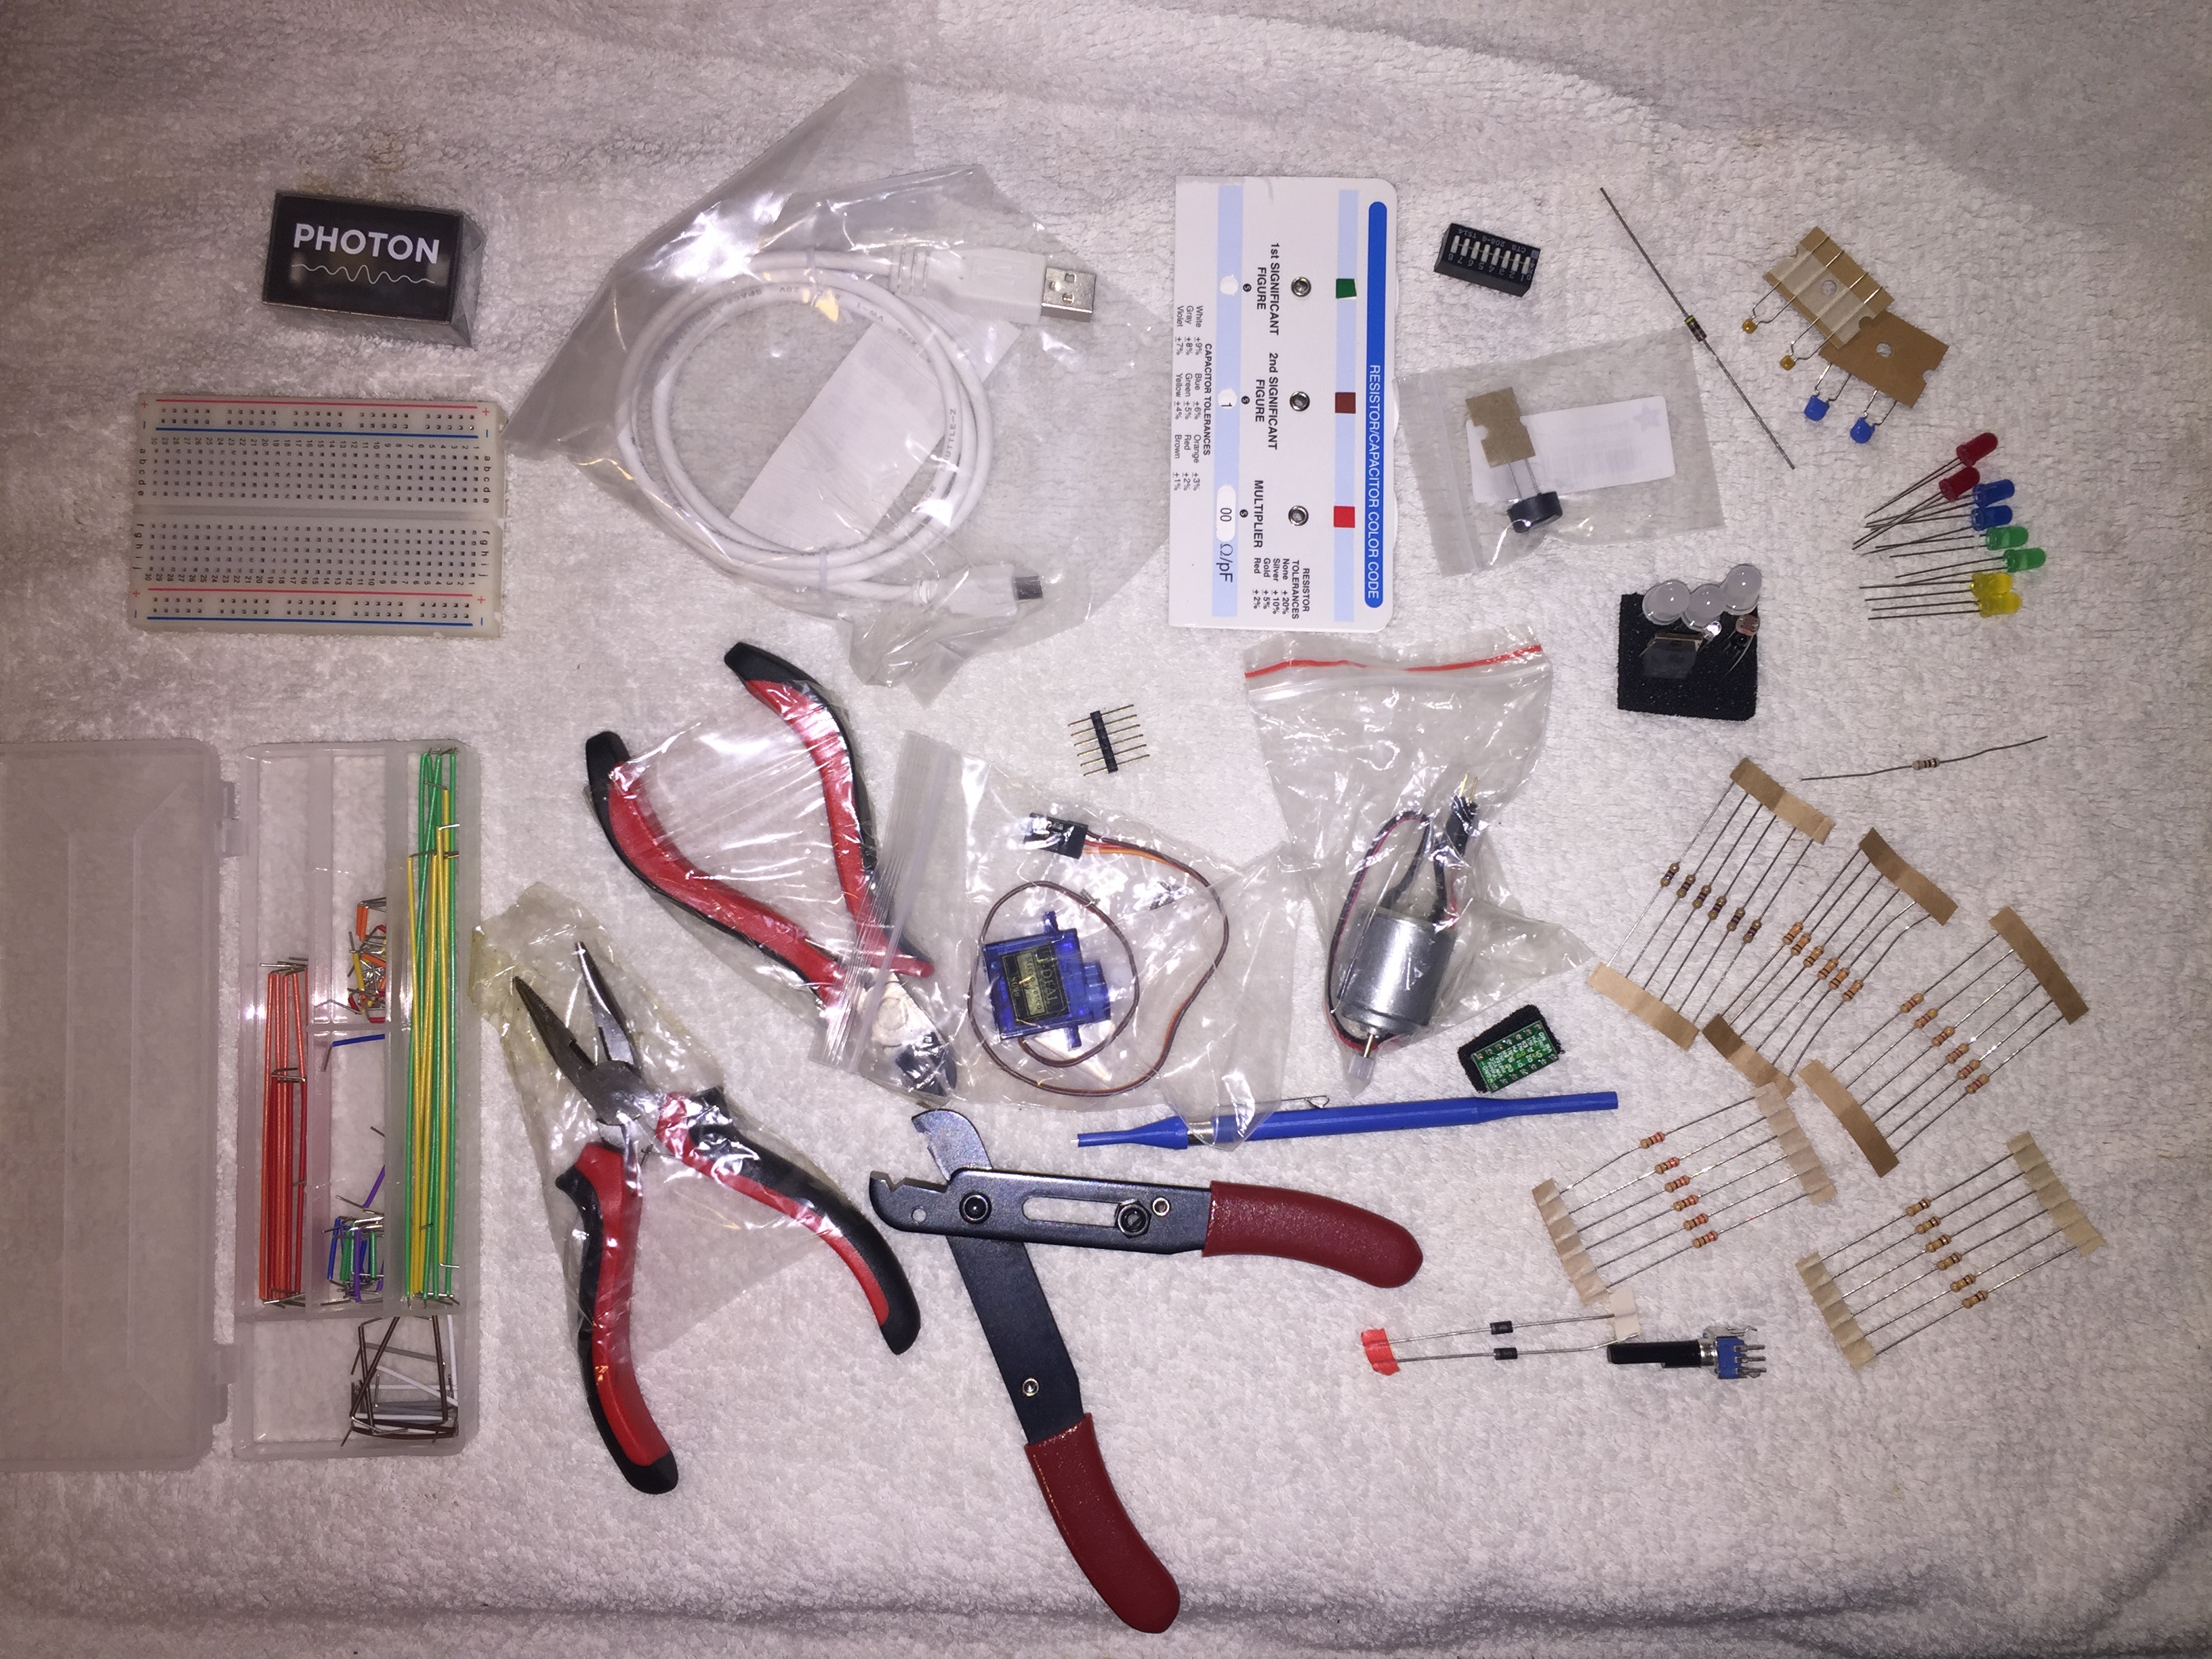 Image of the lab kit parts